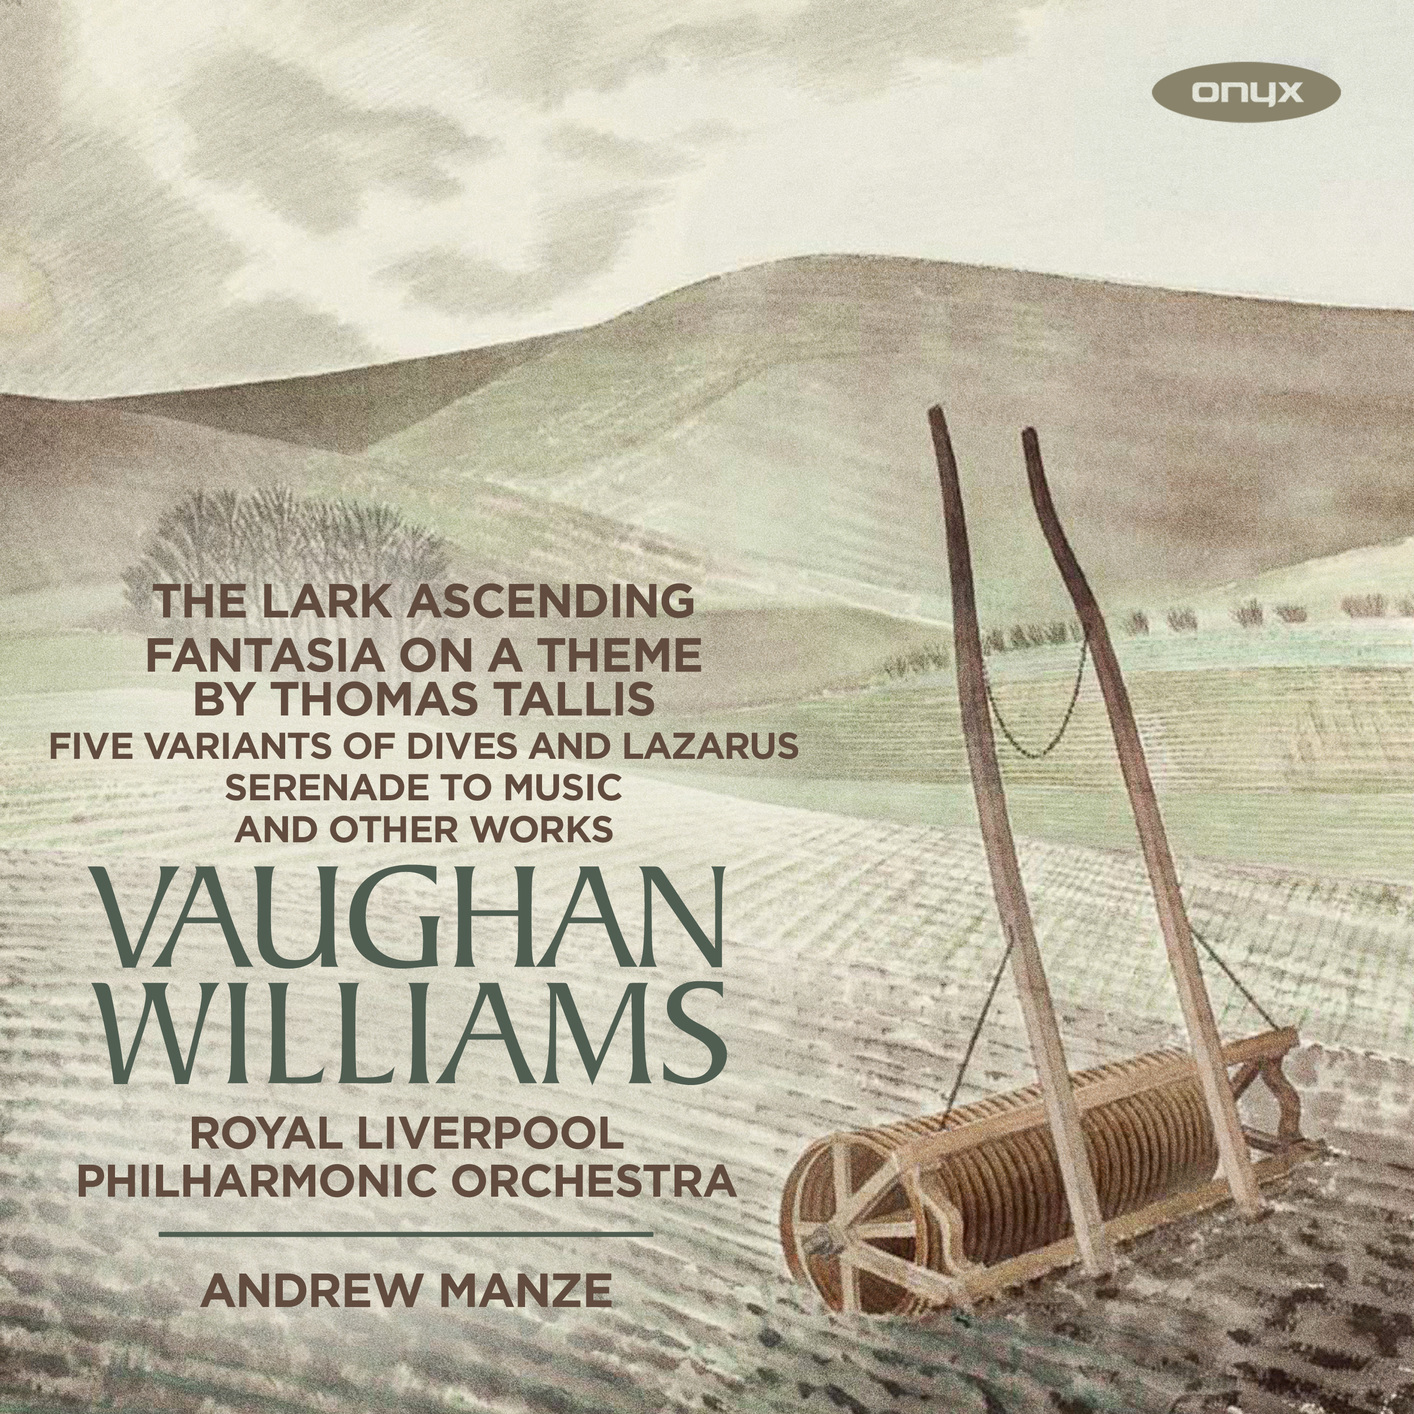 Royal Liverpool Philharmonic Orchestra & Andrew Manze – Vaughan Williams: The Lark Ascending, Fantasia on a Theme by Thomas Tallis and Other Works (2019) [Official Digital Download 24bit/96kHz]